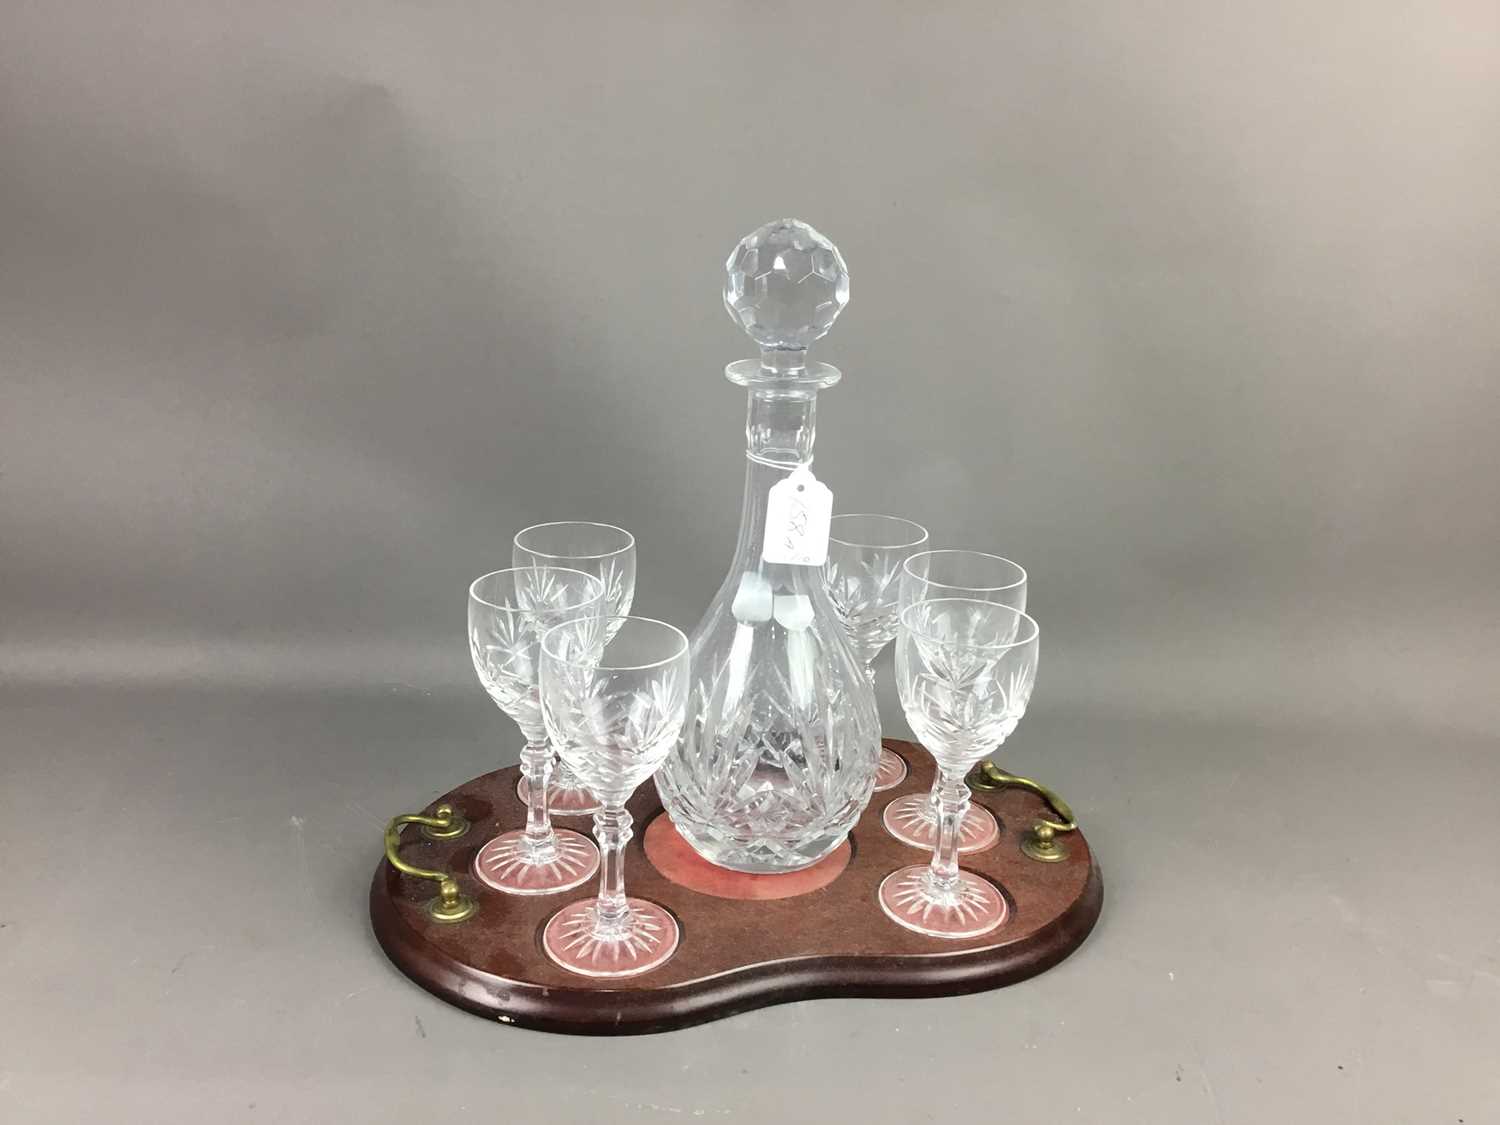 Lot 158 - A CRYSTAL DECANTER AND SIX GLASSES SET